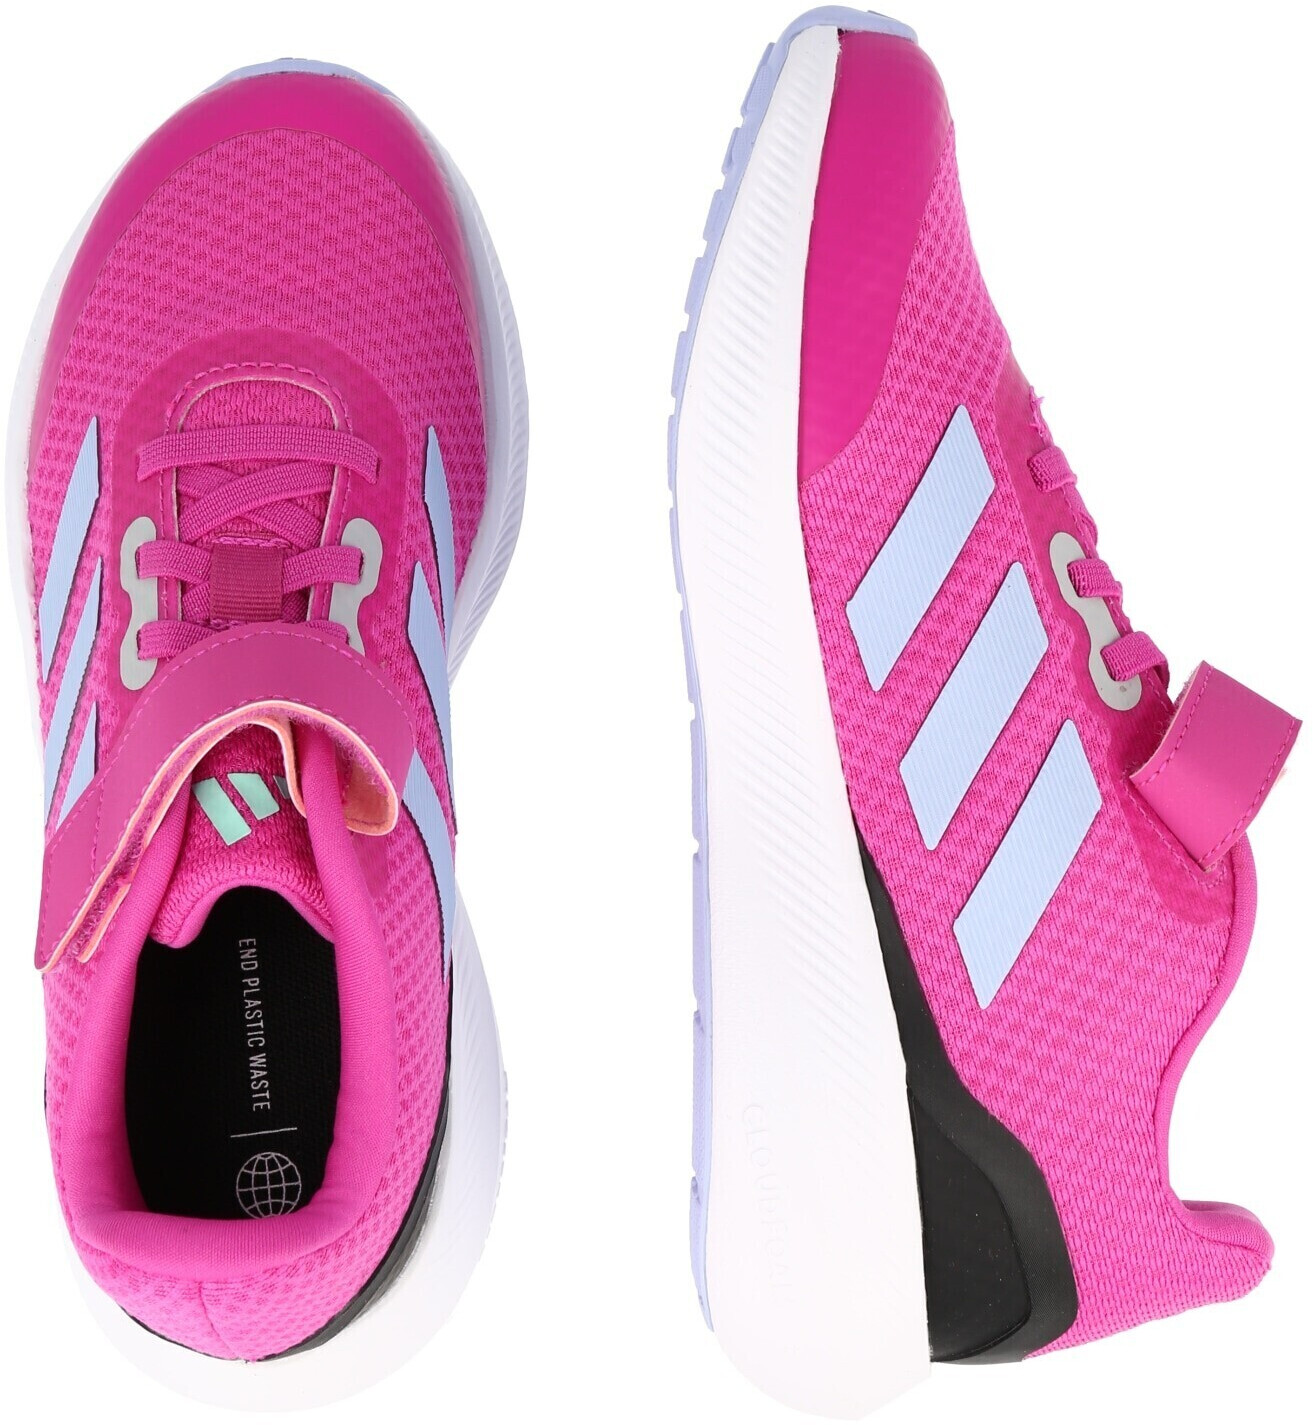 Dawn/Core on £15.50 Fuchsia/Blue from Lucid Lace 3.0 Black Kids Buy Strap Top – Elastic Deals Best Runfalcon Adidas (Today)